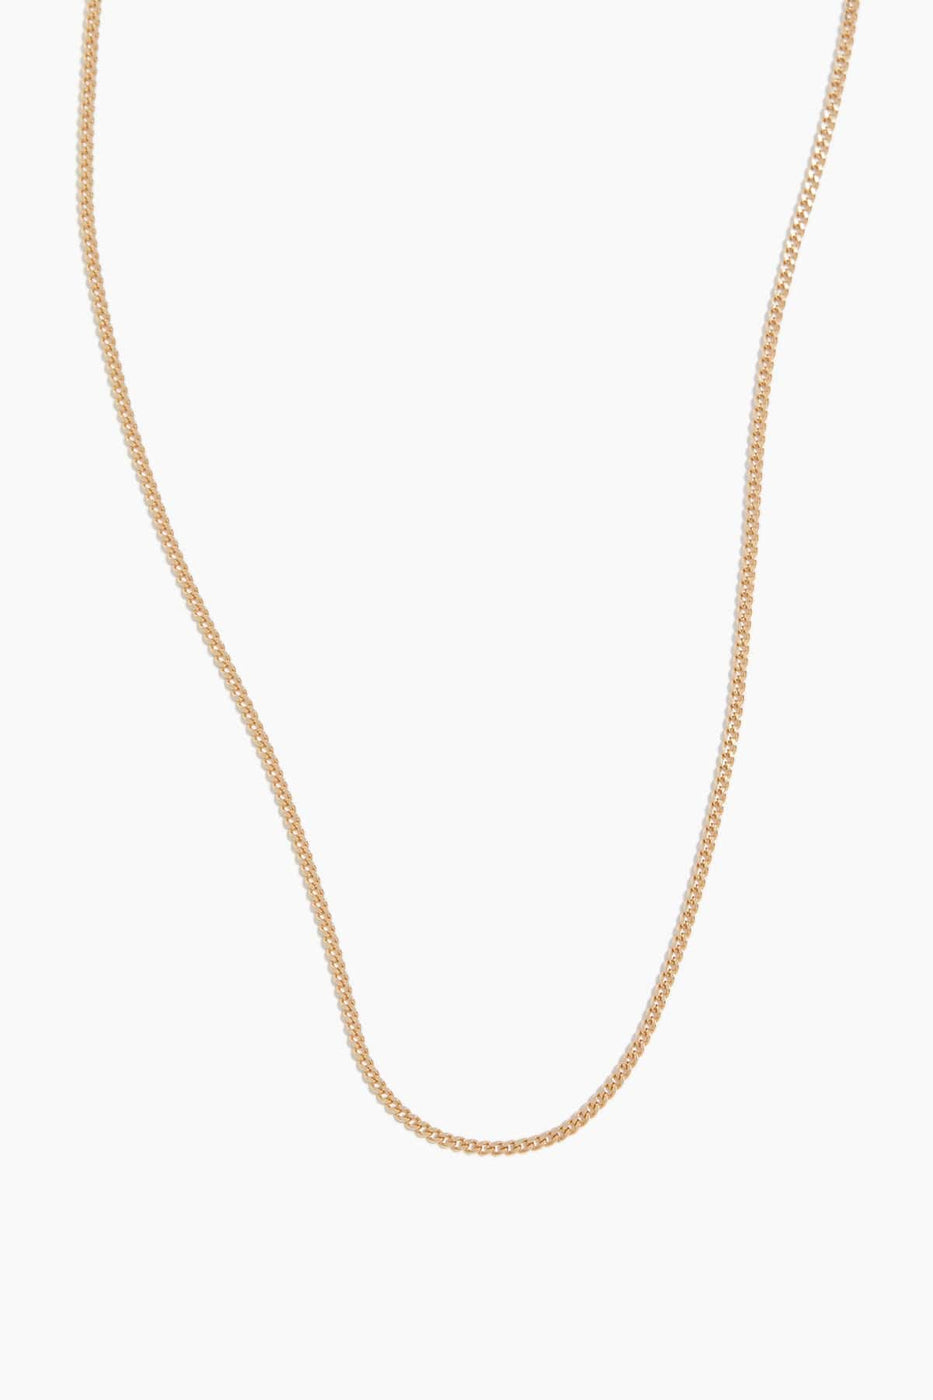 Adina Reyter Necklaces Finished Small Curb Chain in 14k Yellow Gold - 16" Adina Reyter Finished Small Curb Chain in 14k Yellow Gold - 16"